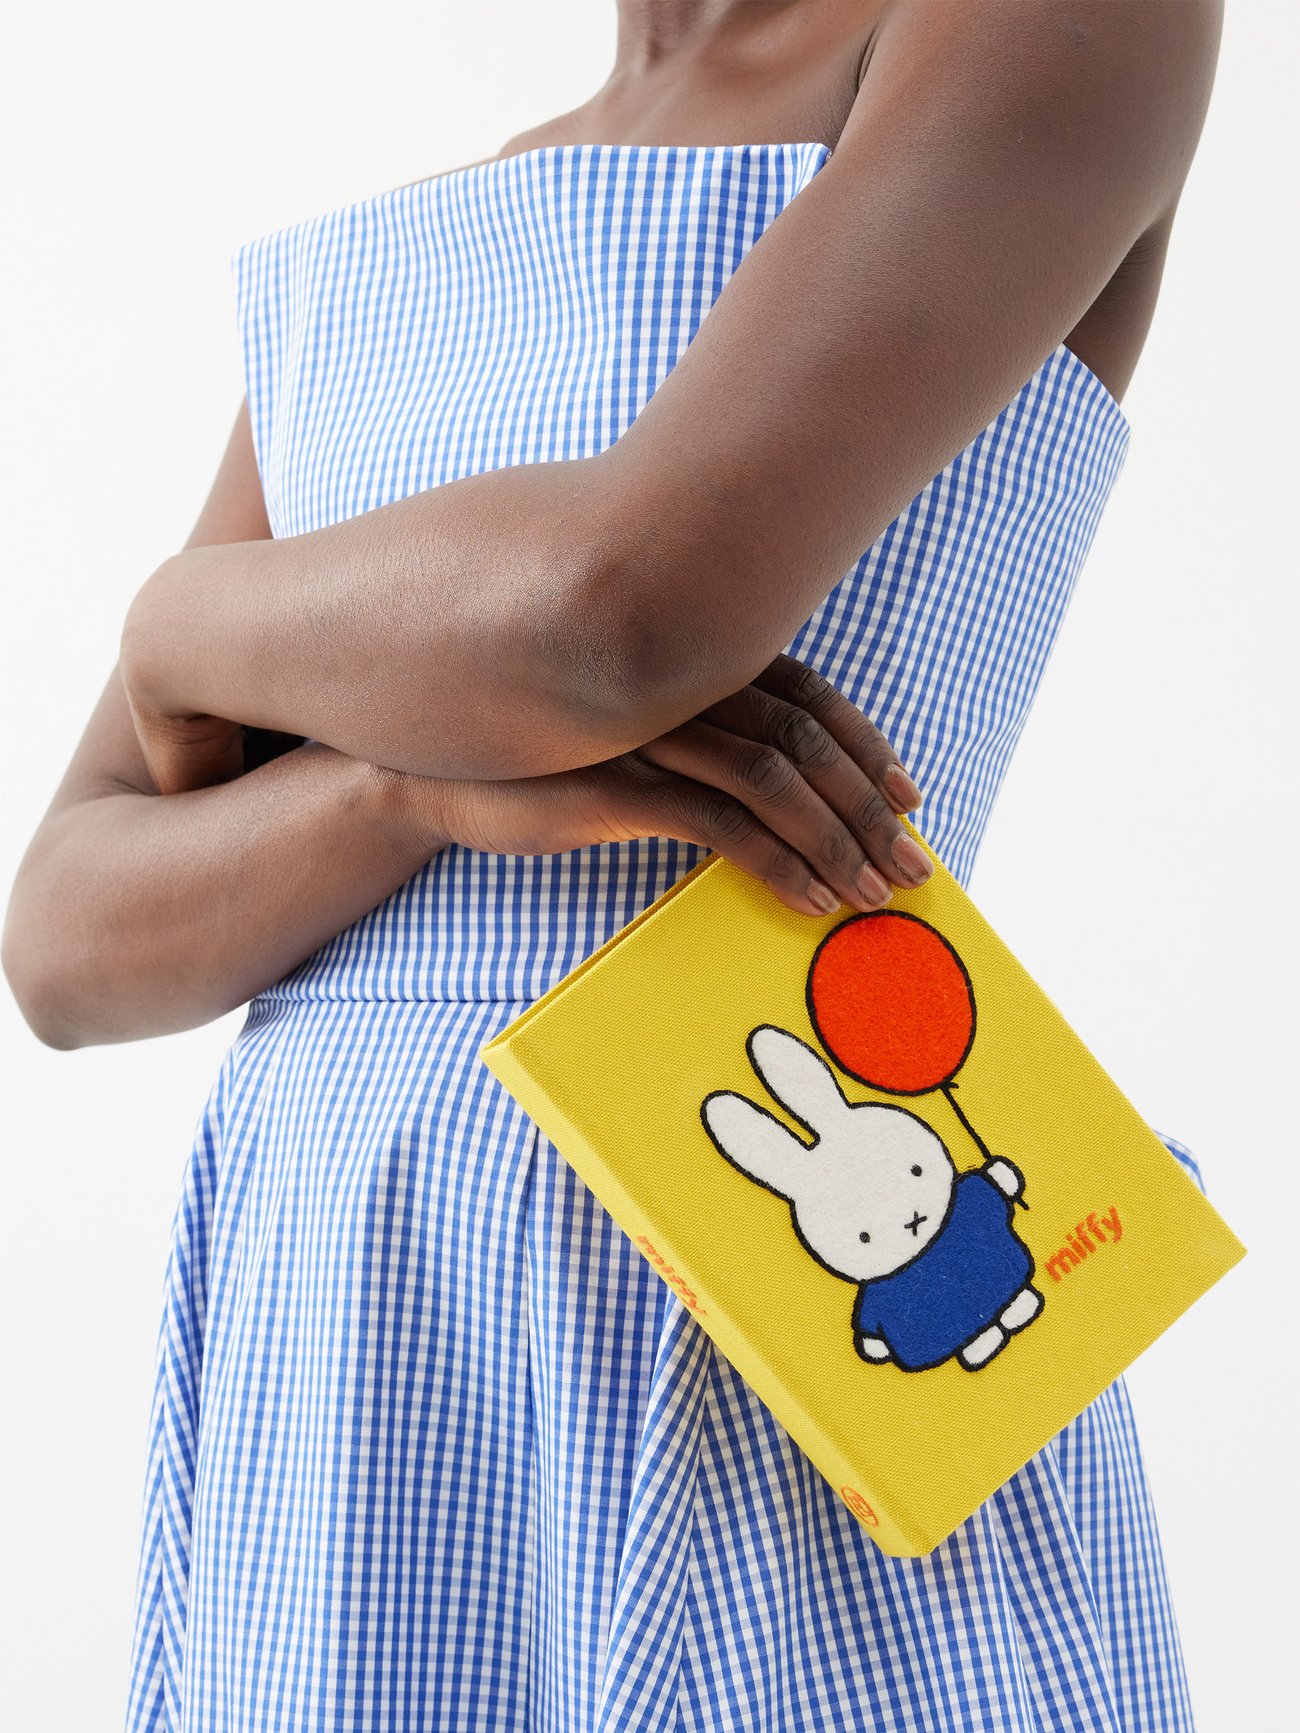 Geek-Chic Embroidered Book Clutch Bags by Olympia Le-Tan - PLAIN